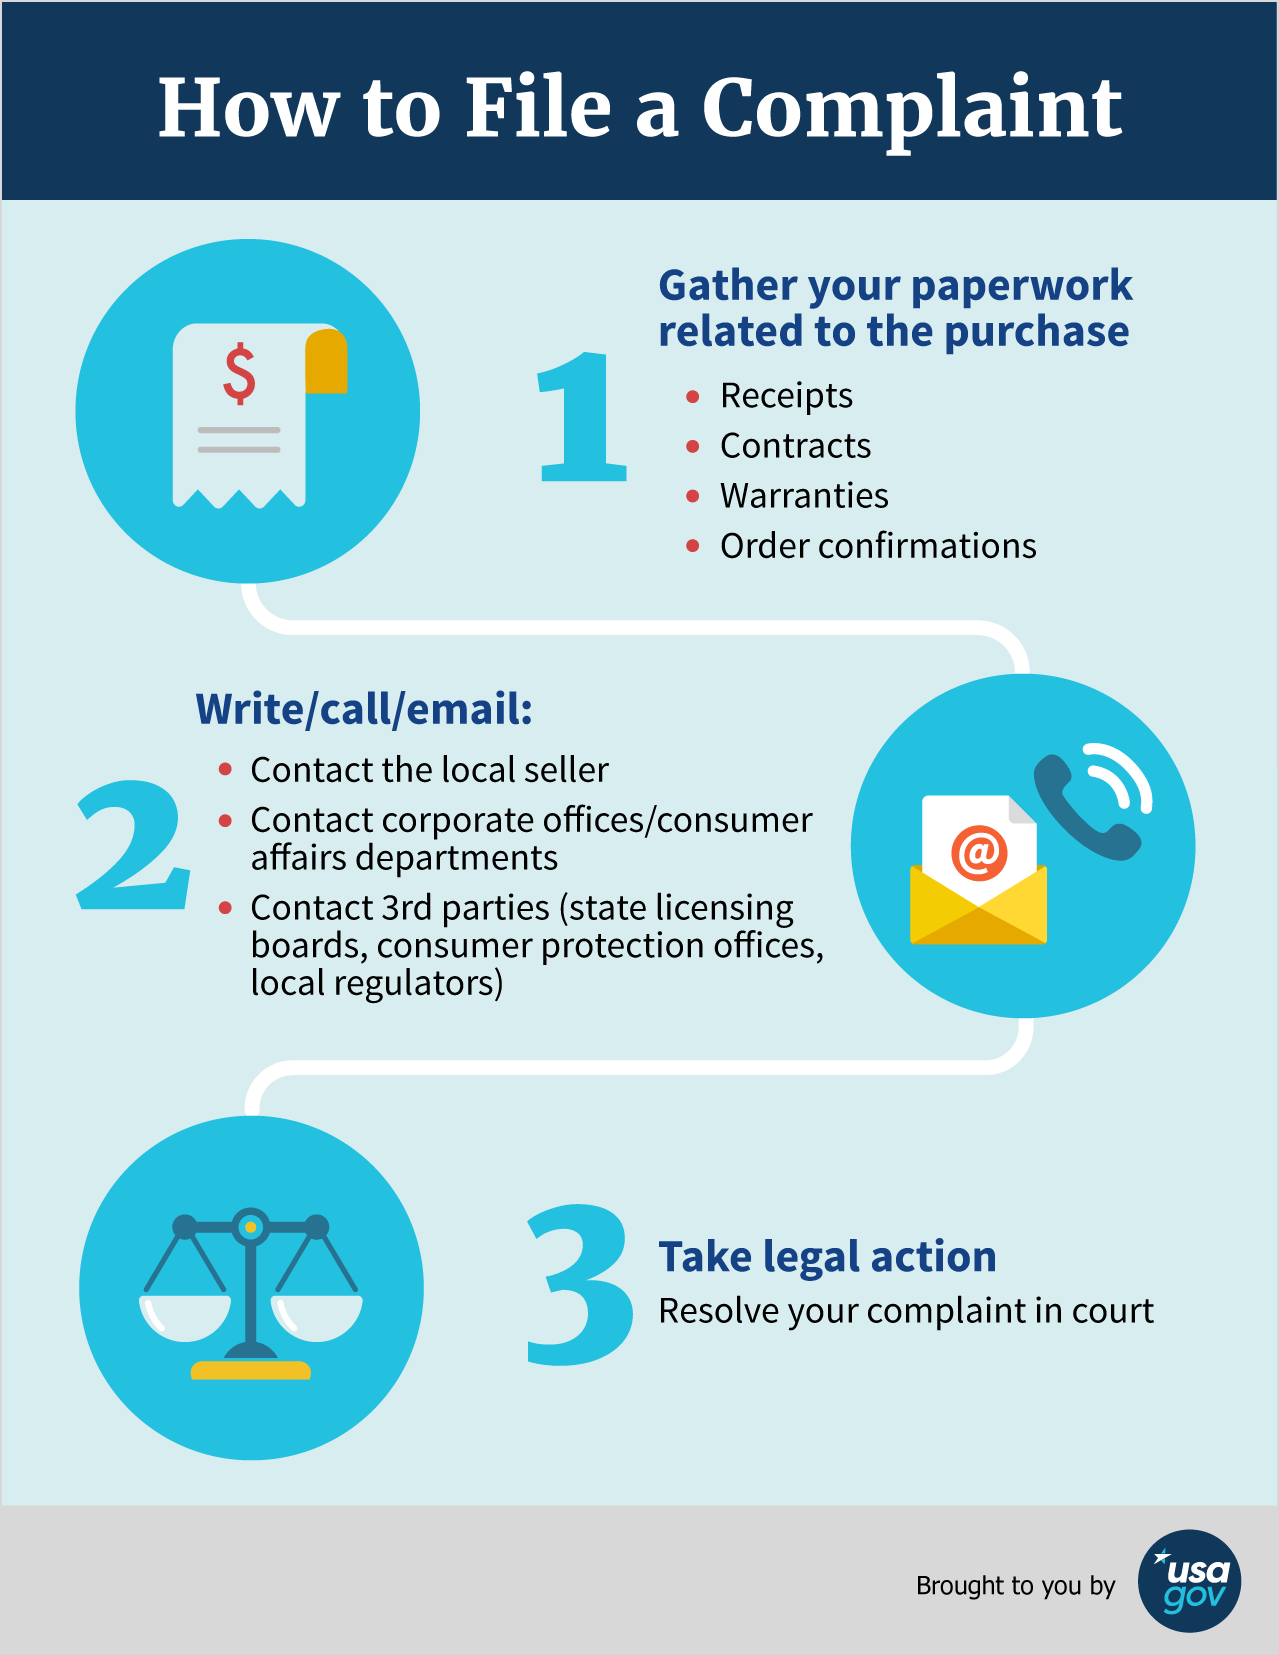 How to file a consumer complaint infographic